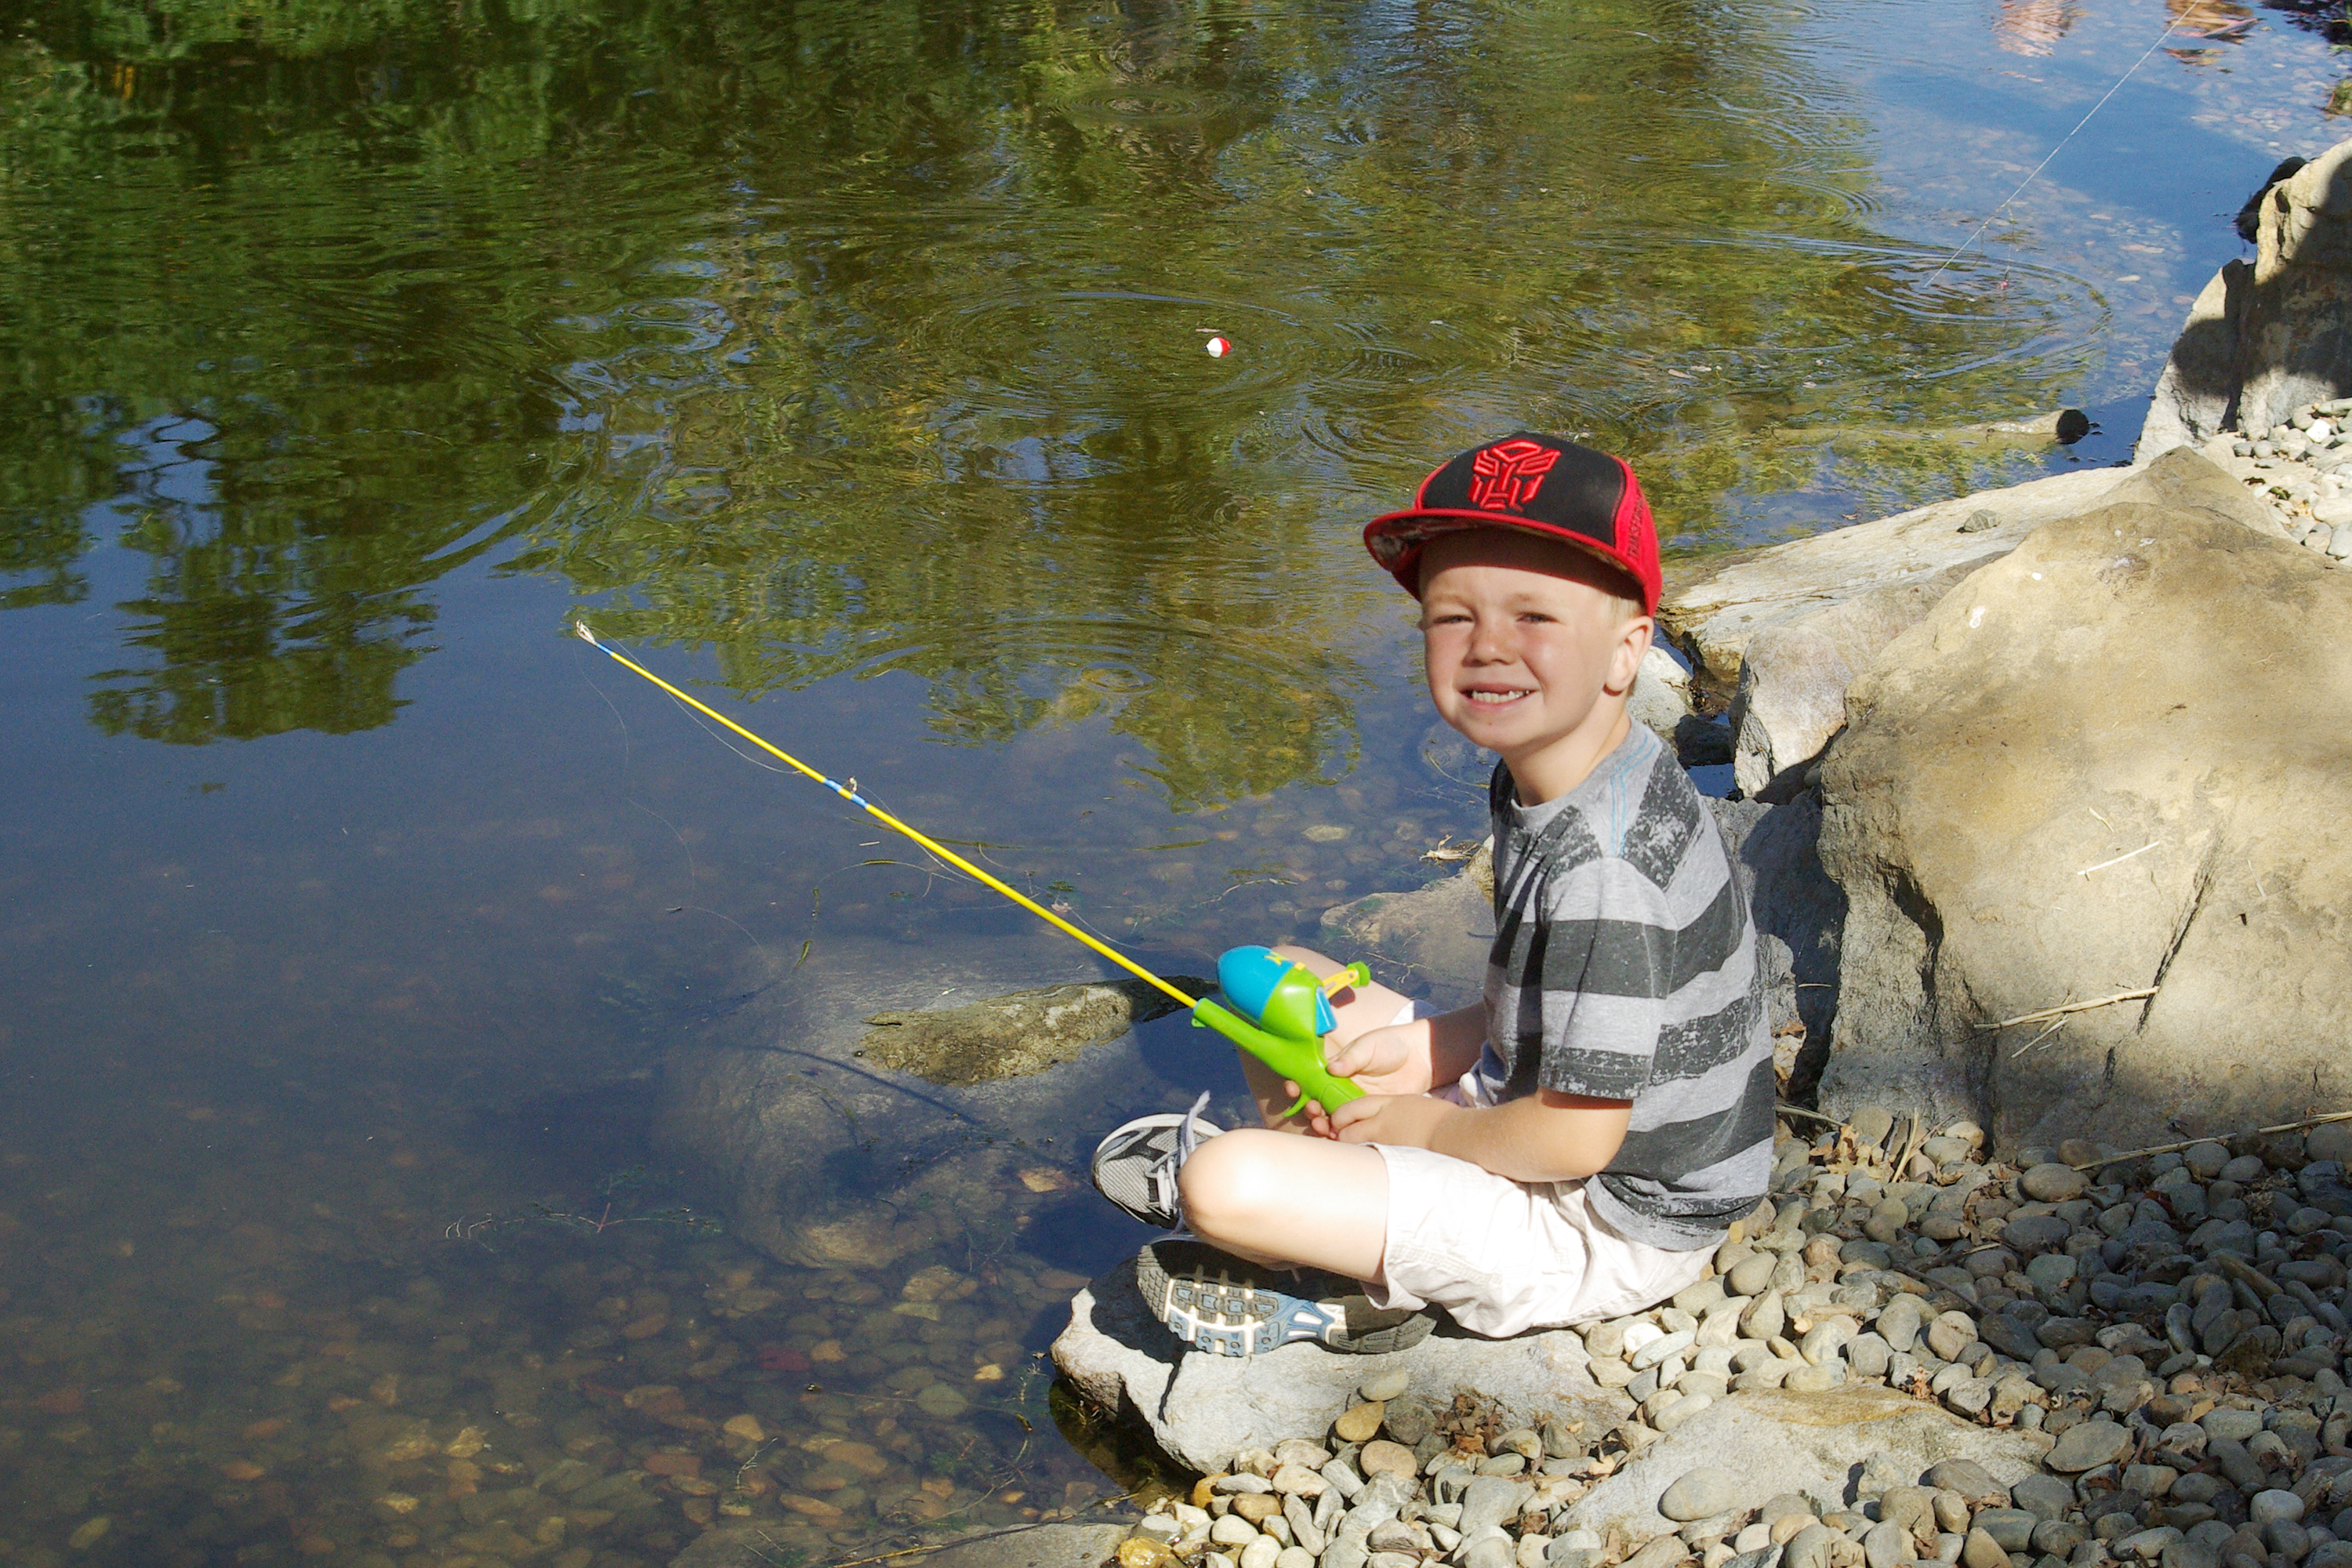 Kids Fishing Day fun for special needs children